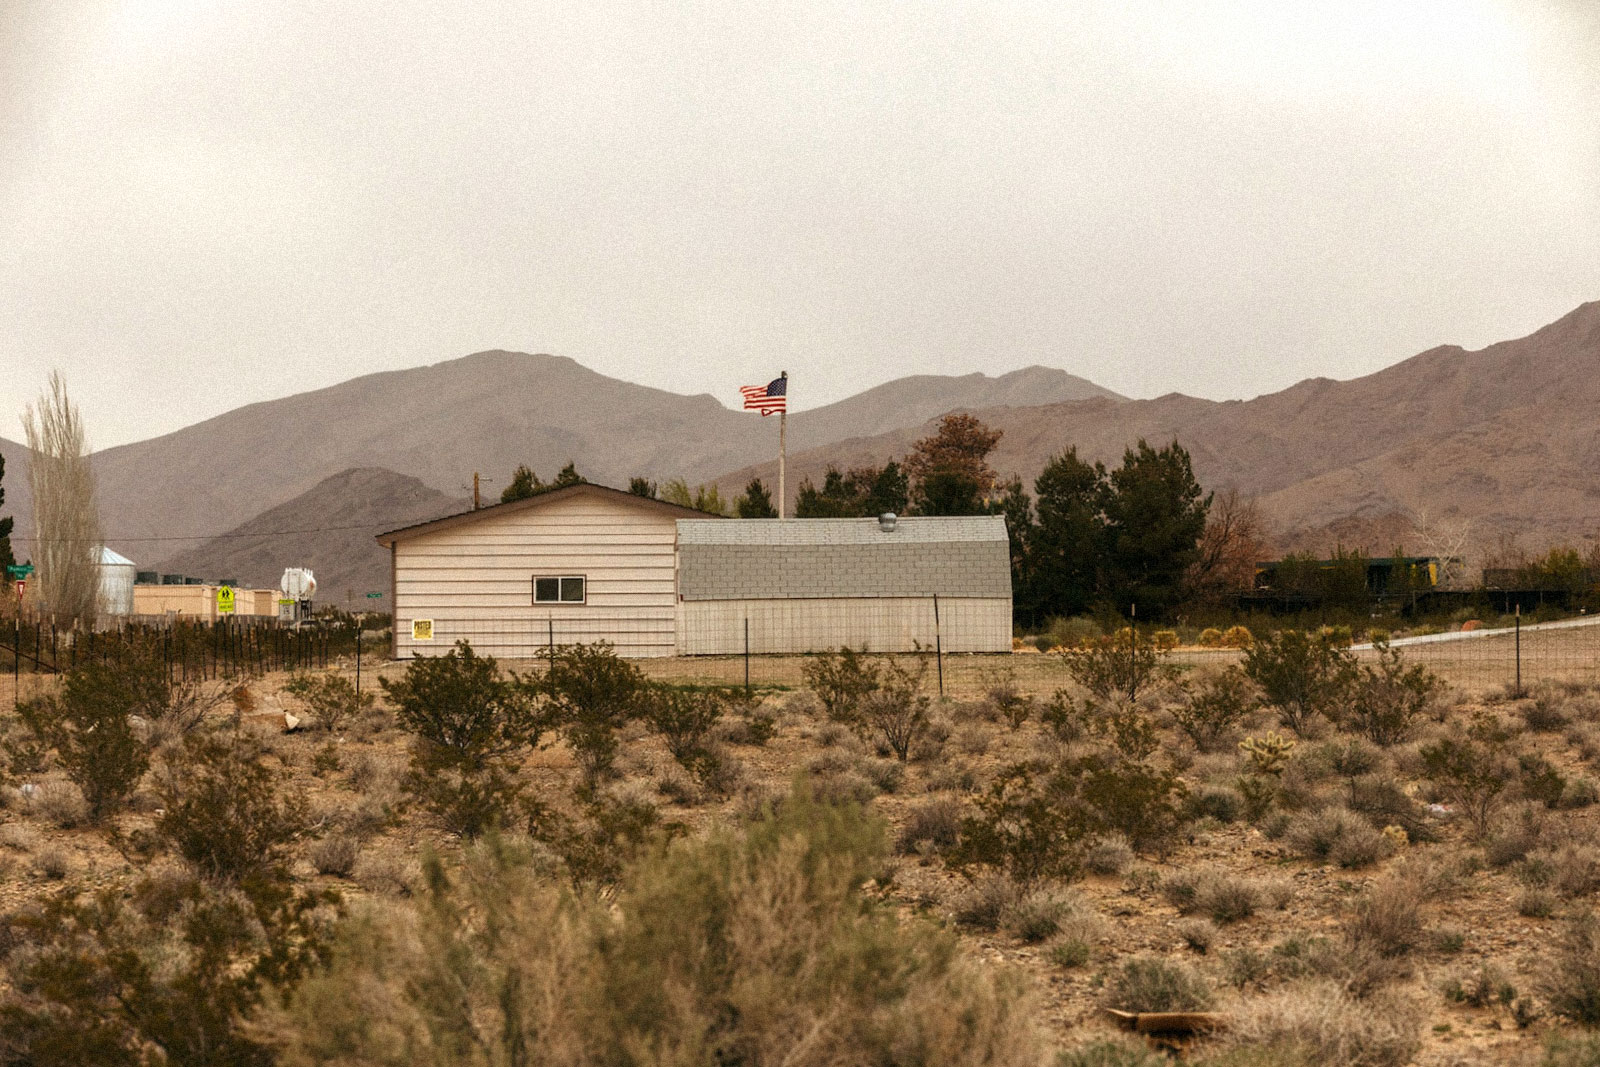 a house flying an American flag in a desert